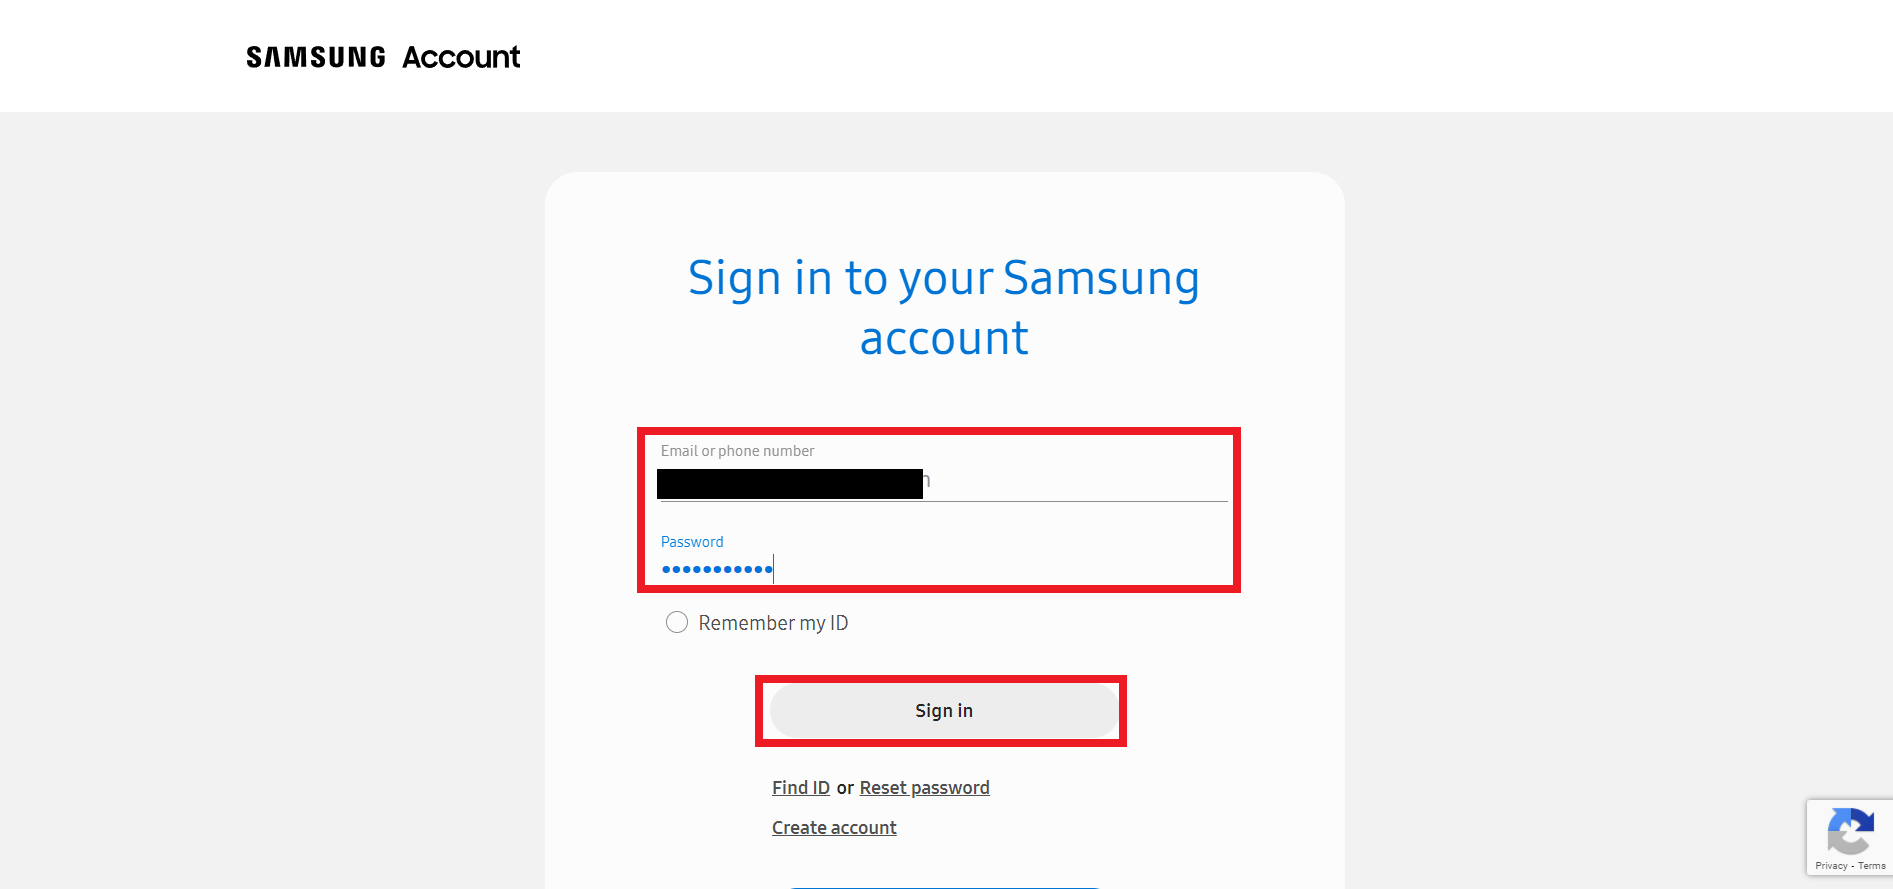 Sign in to your Samsung account with your Email or phone number and Password